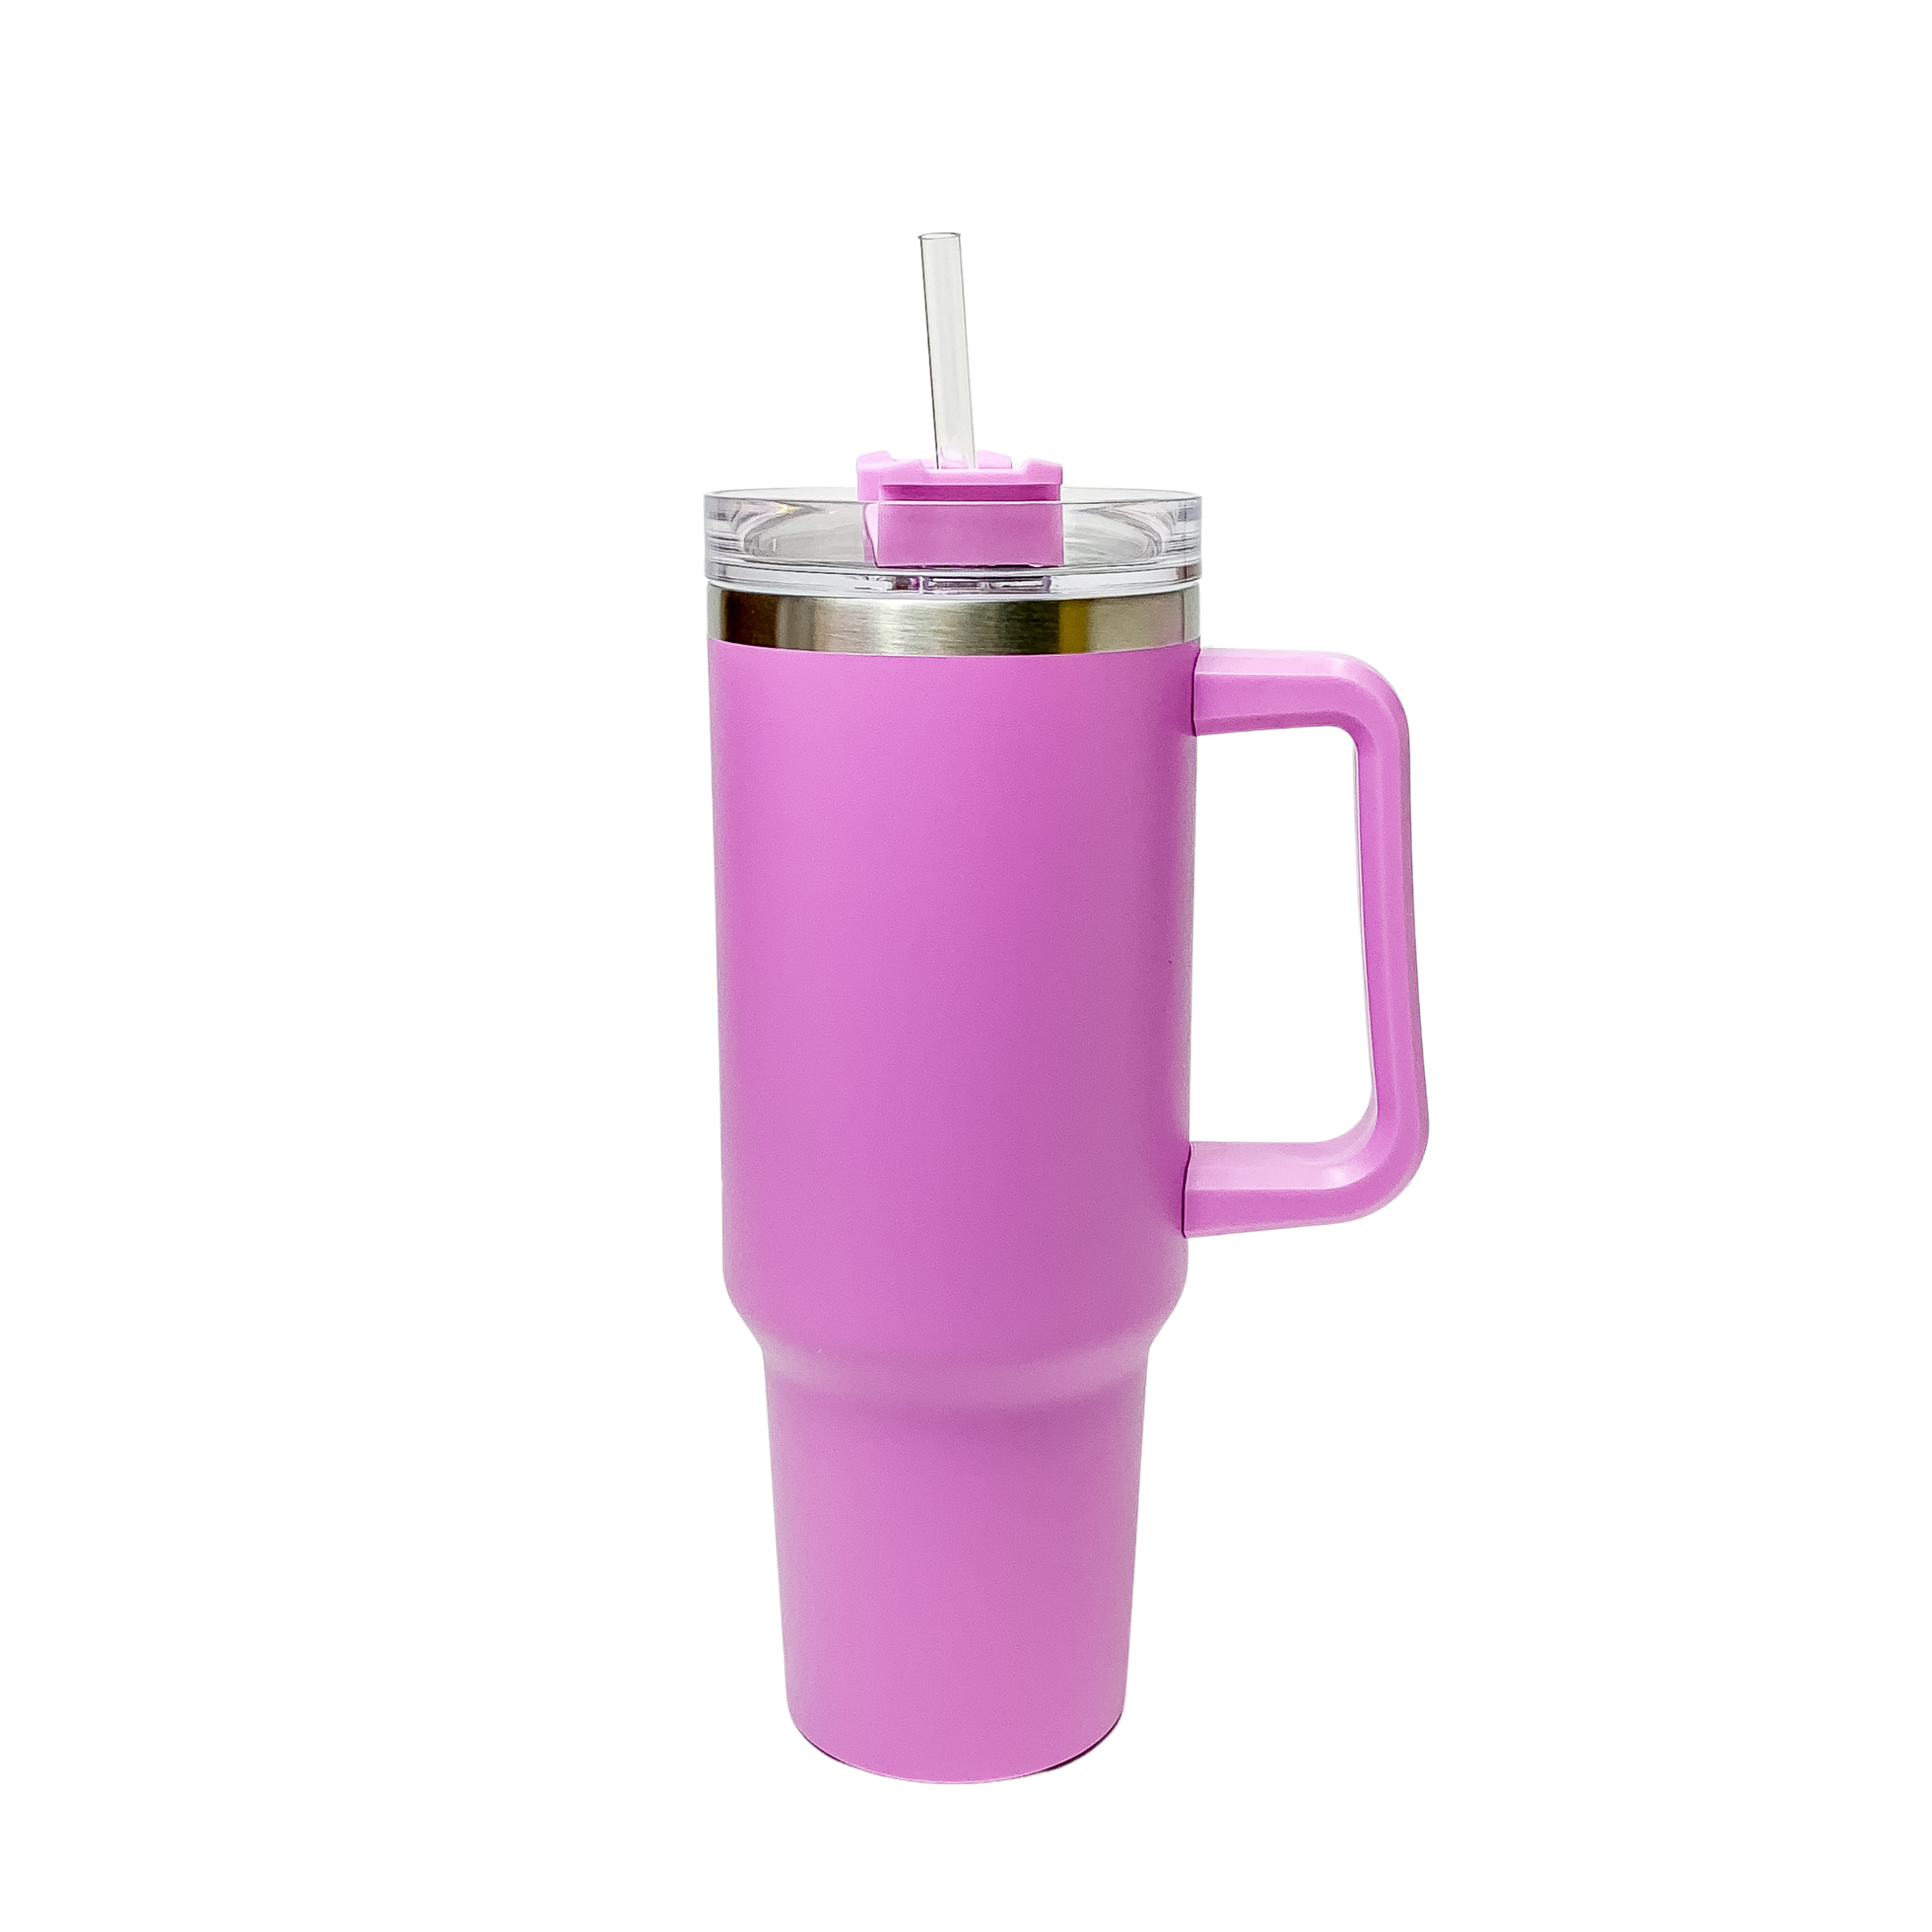 Pictured is a violet pink tumbler with a handle and clear straw. This tumbler is pictured on a white background. 